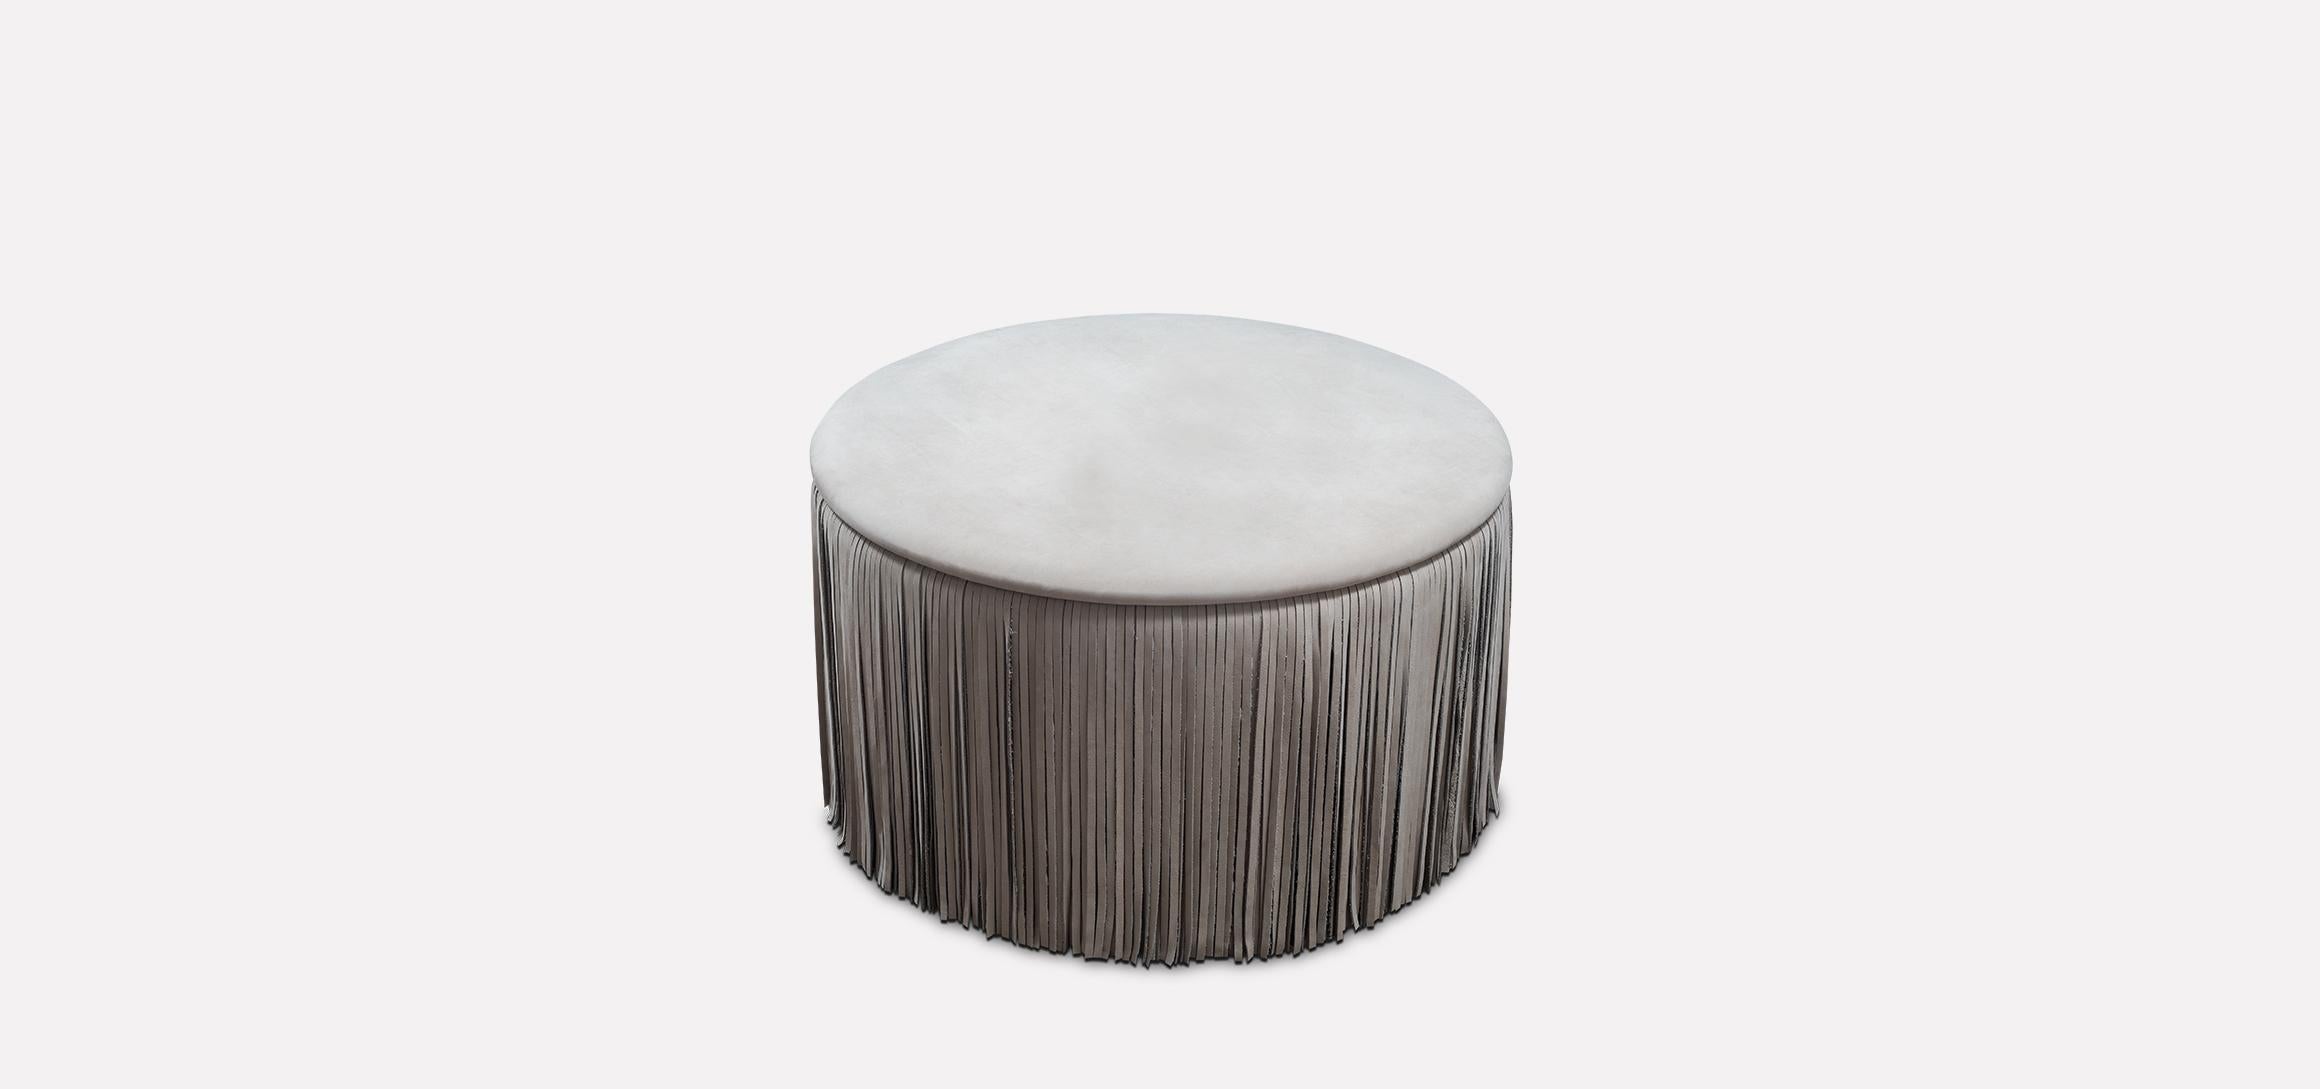 The TAGLIA round leather ottoman introduces the timeless fashion element of fringes to haute furniture design. This little playful round ottoman with a curved seat is surrounded by a dense skirt of nubuck leather fringes and provides your living